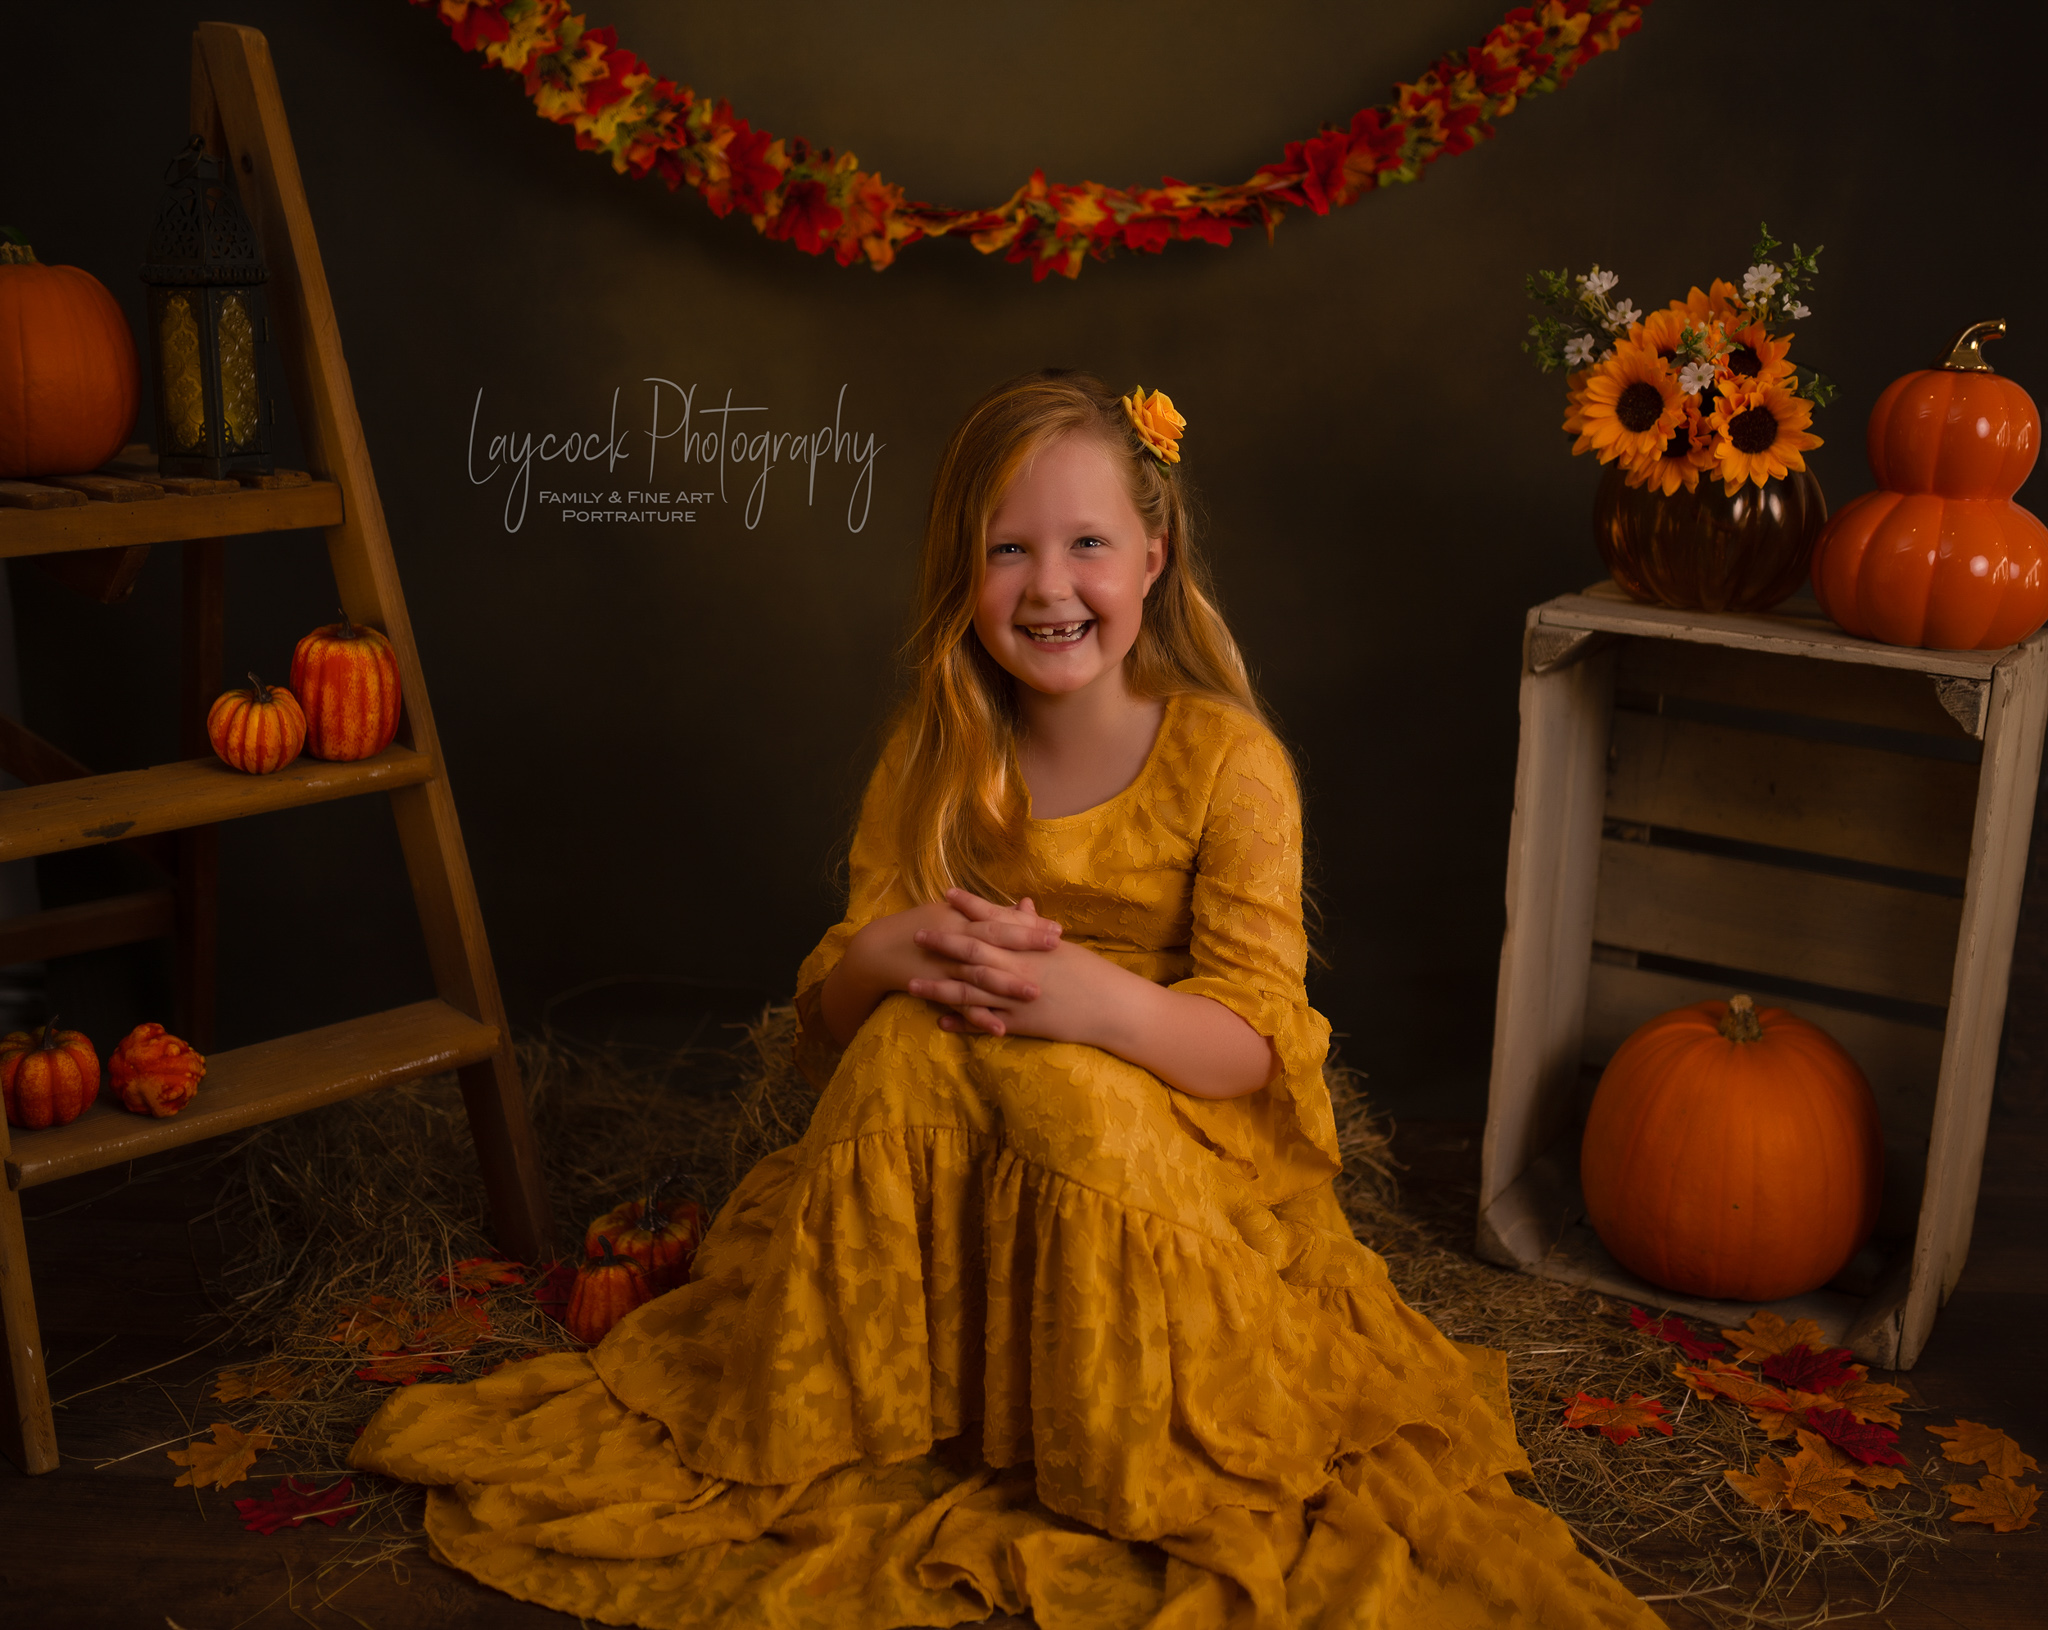 Young girl sat on straw with aumnal leaves and pumpkins around her